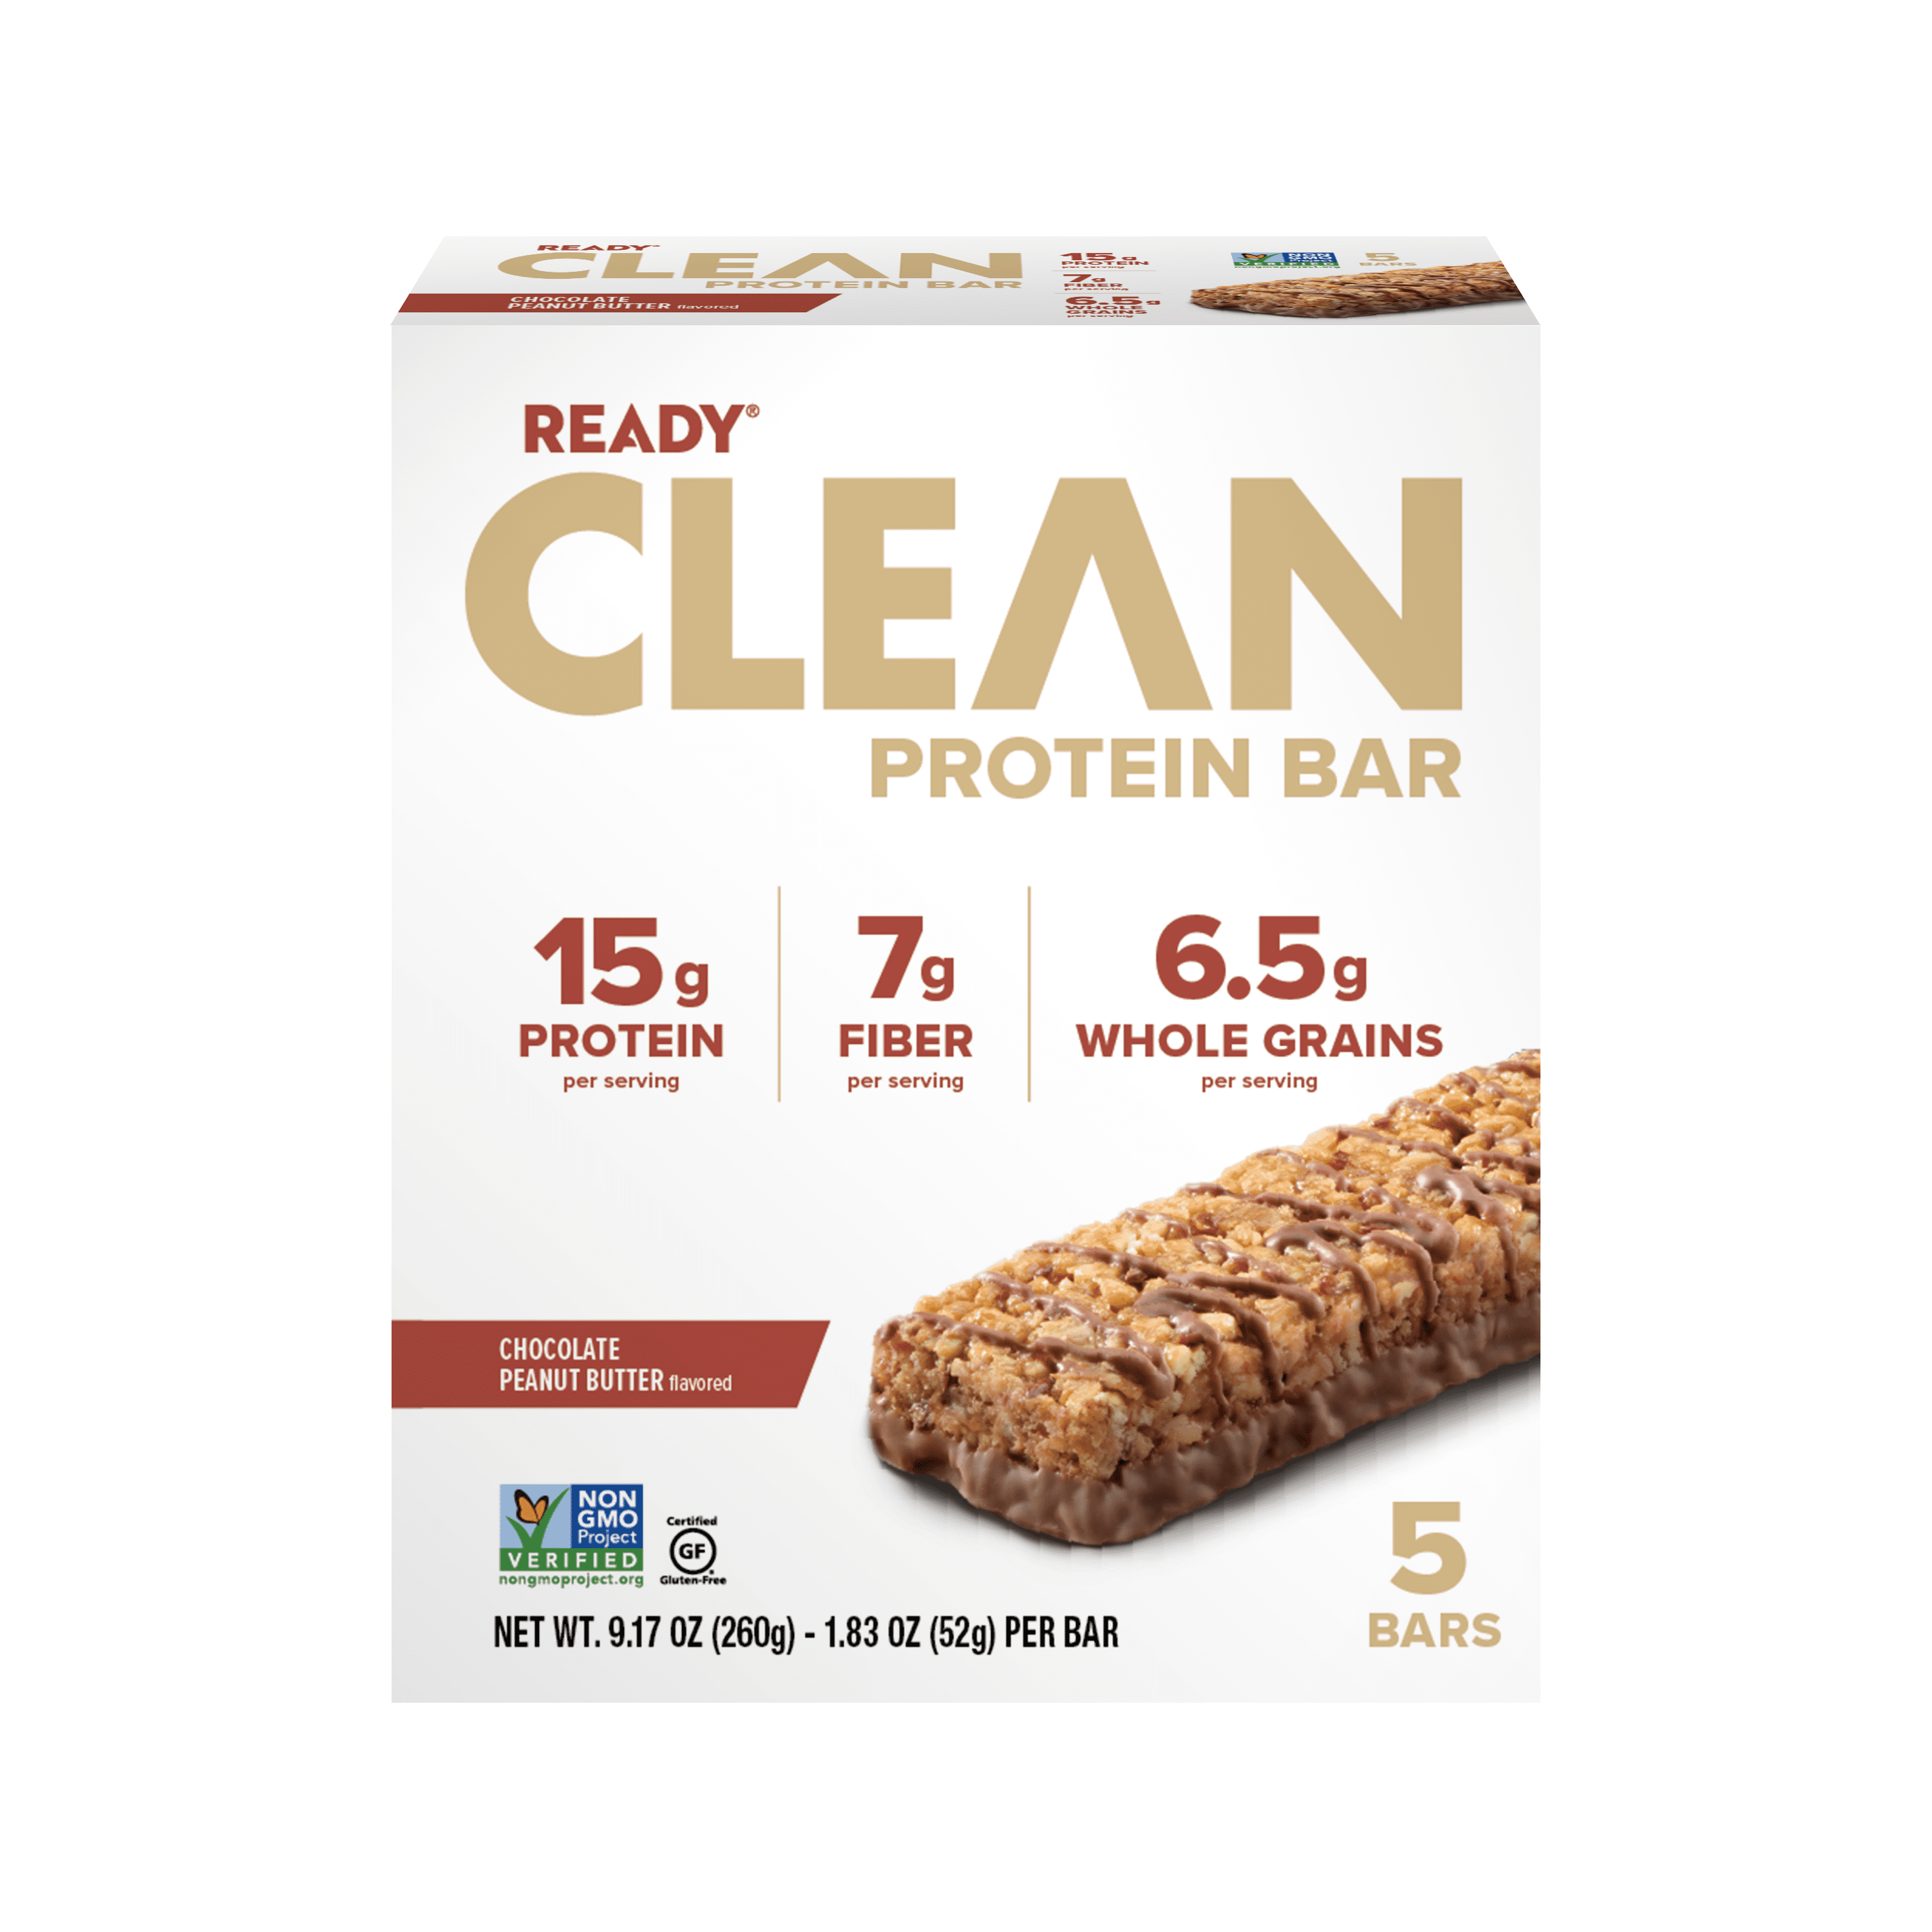 Ready Clean Protein Bar, Chocolate & Peanut Butter, 5 Count Bars